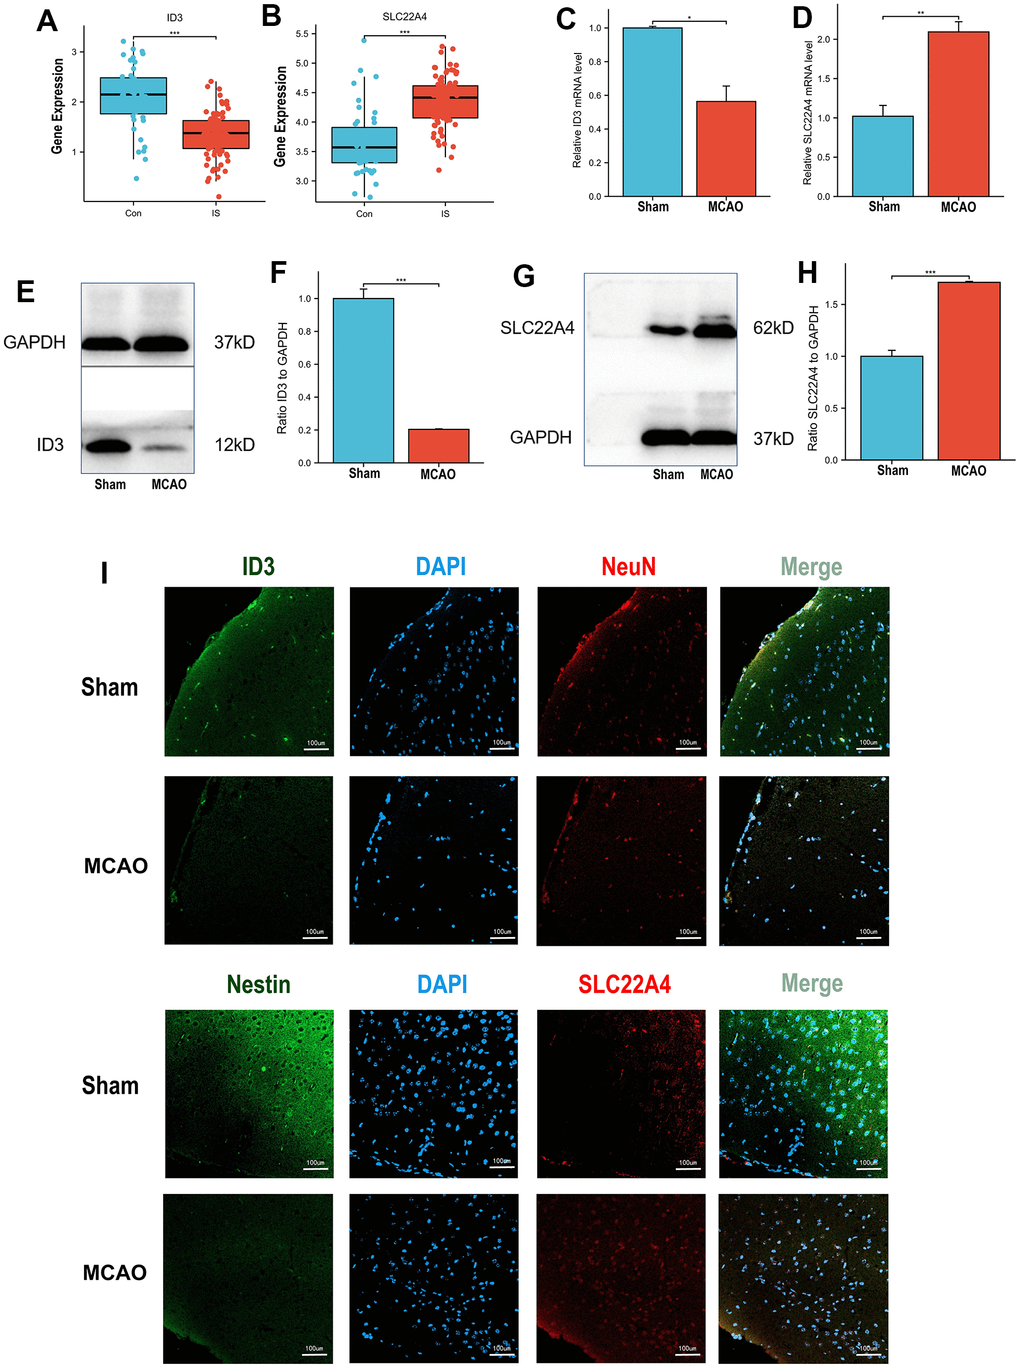 Expression validation in vivo models. (A) ID3 expression patterns in IS patients and controls in discovery set. (B) SLC22A4 expression patterns in IS patients and controls in discovery set. (C) The mRNA levels of ID3 in mouse brain tissues. (D) The mRNA levels of SLC22A4 in mouse brain tissues. (E, F) The protein levels of ID3 in mouse brain tissues. (G, H) The protein levels of SLC22A4 in mouse brain tissues. (I) The immunofluorescence levels of ID3 and SLC22A4 in mouse brain tissues. MCAO group and sham group, number of mice per group n=6.